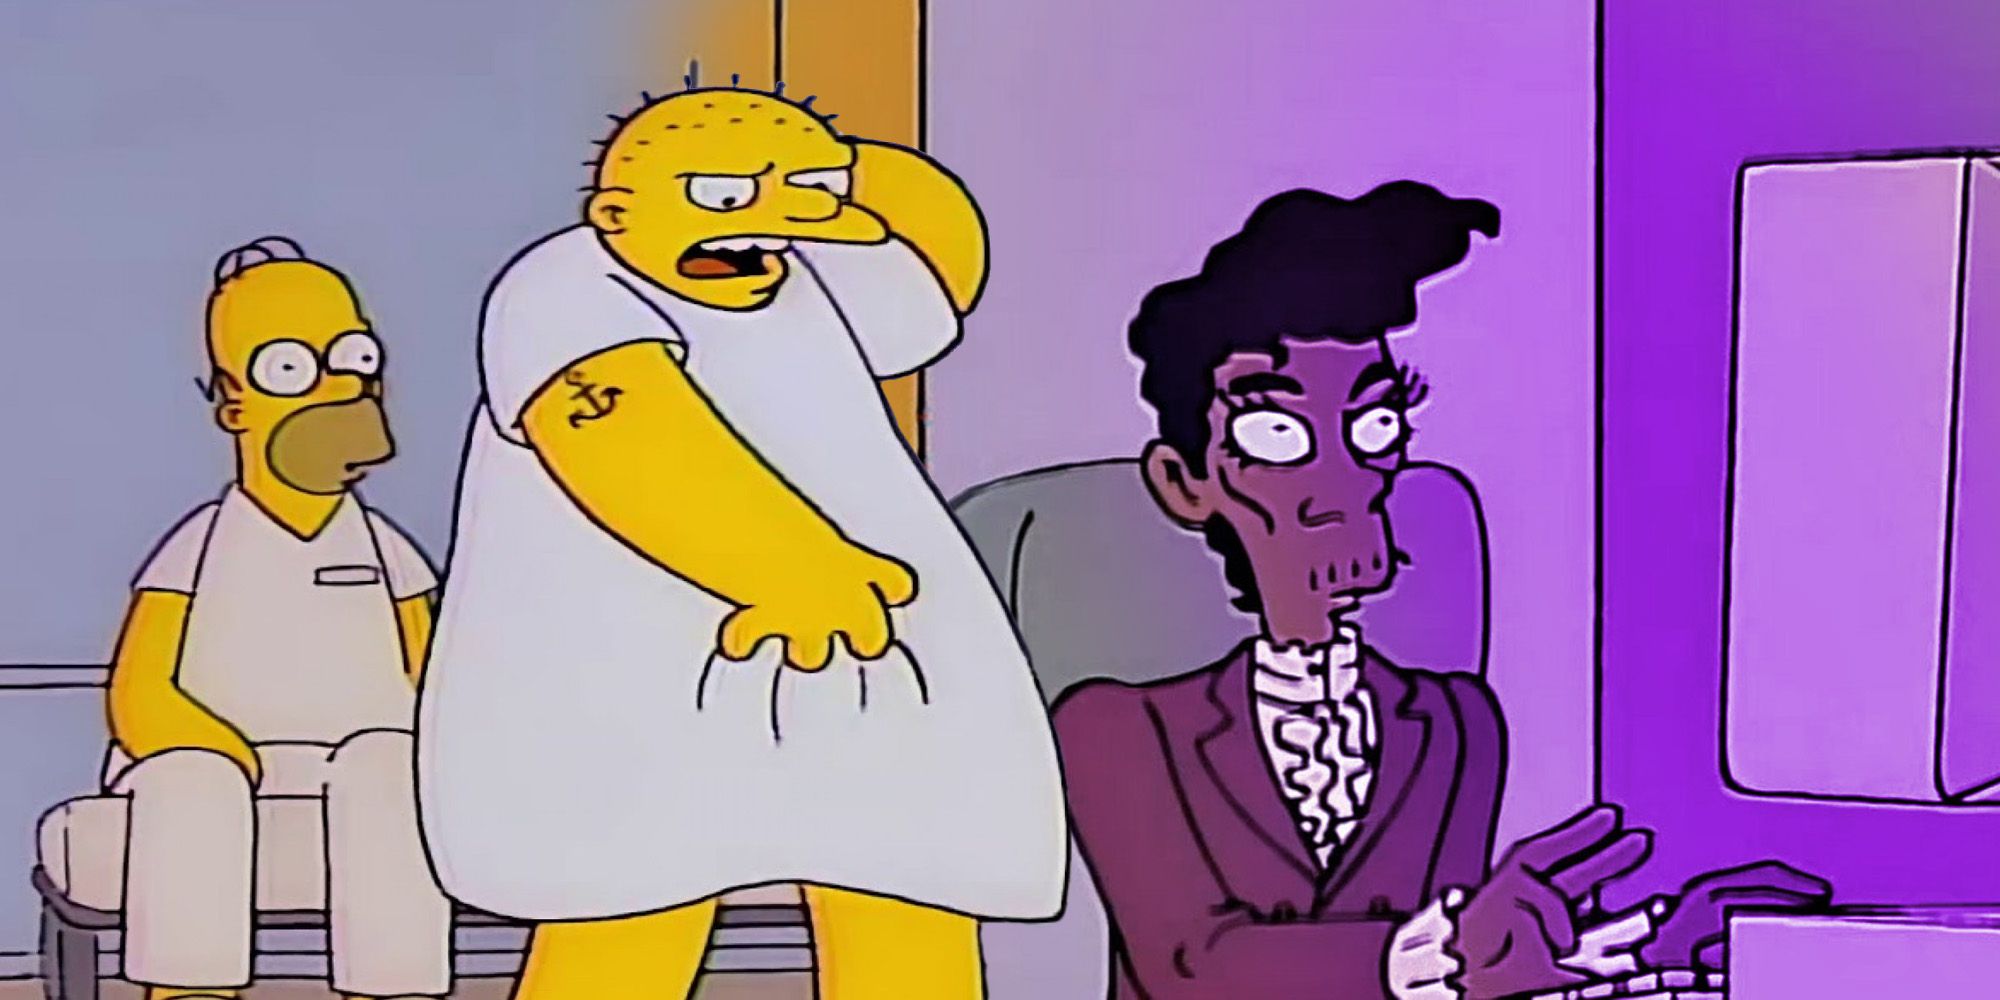 Prince the simpsons cameo michael jackson lost episode